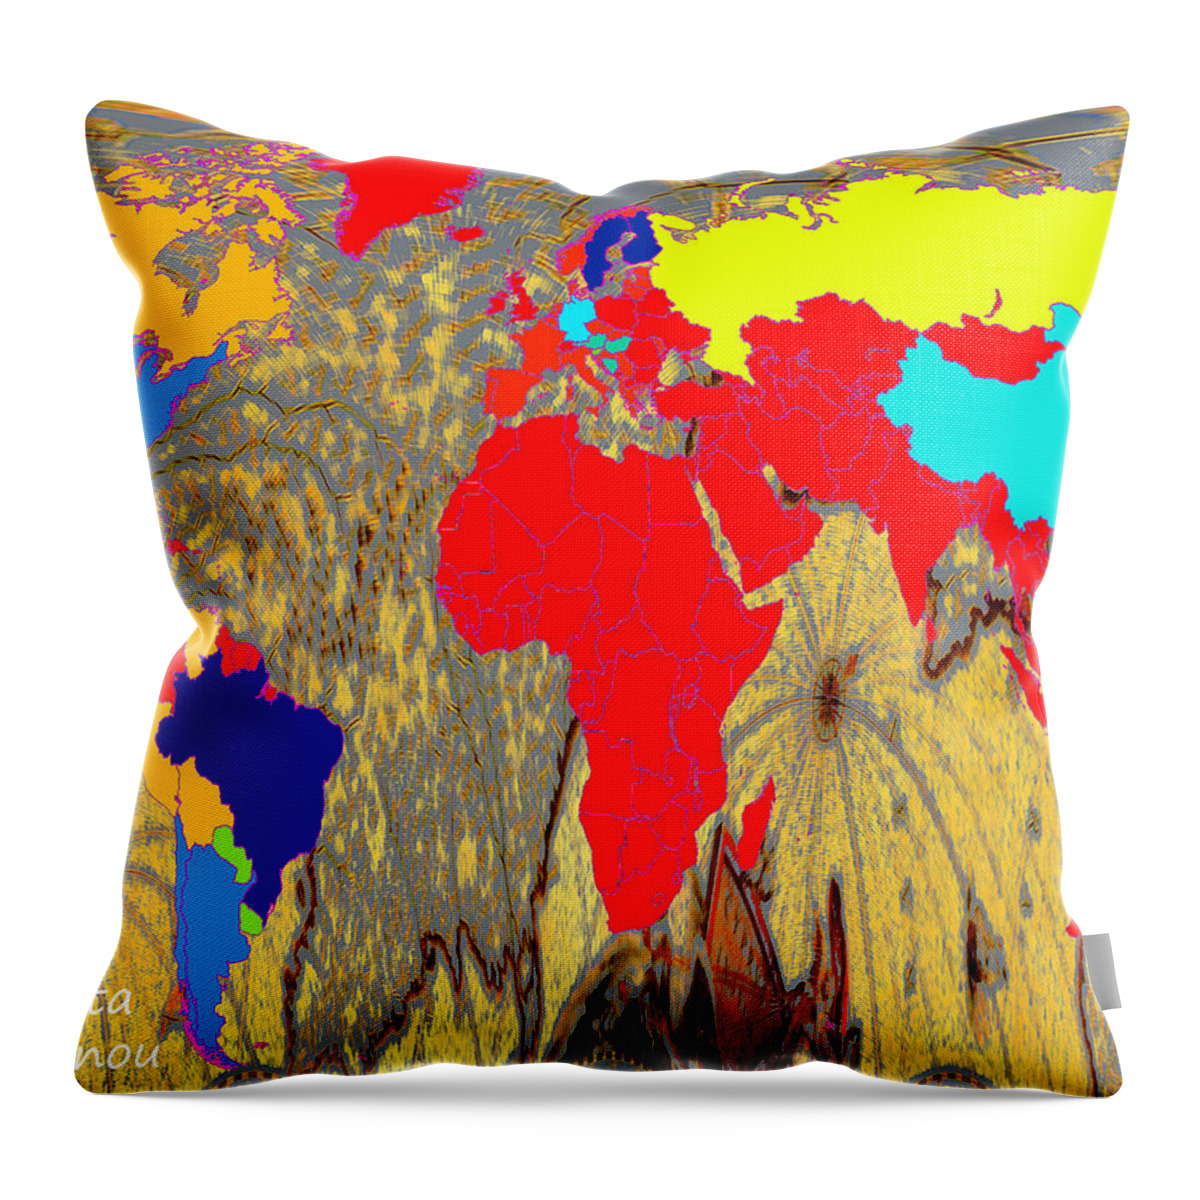 Augusta Stylianou Throw Pillow featuring the digital art World Map and Abstract Cyprus #2 by Augusta Stylianou